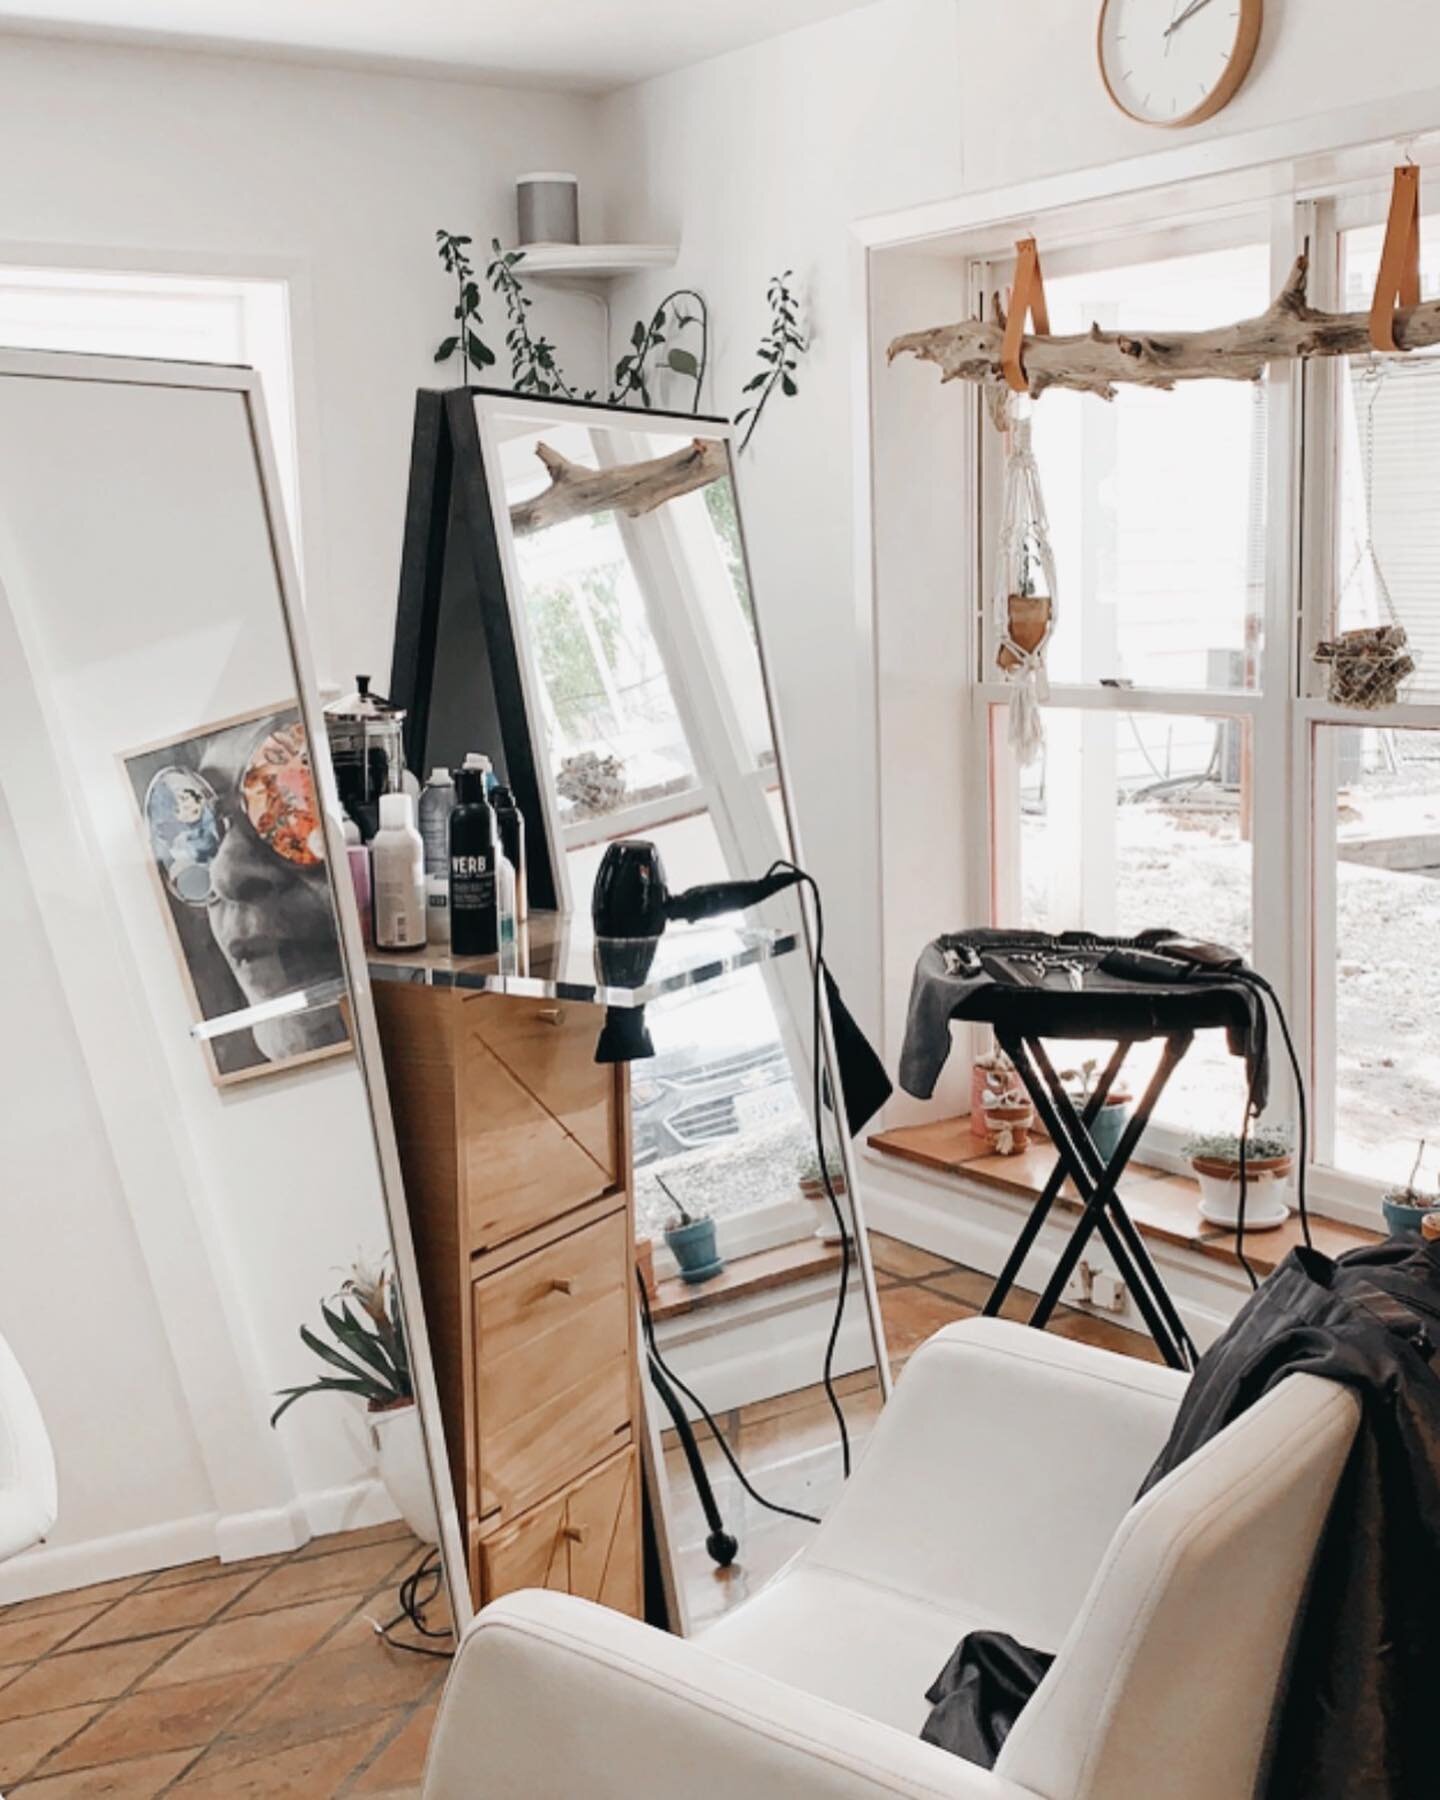 Where so many of the important details unfold 💫

Our little nook at @wandershopsalon is where the majority of our bridal hair and makeup trials happen. 

We&rsquo;ve had so many amazing conversations with even more amazing clients in this space. 

W